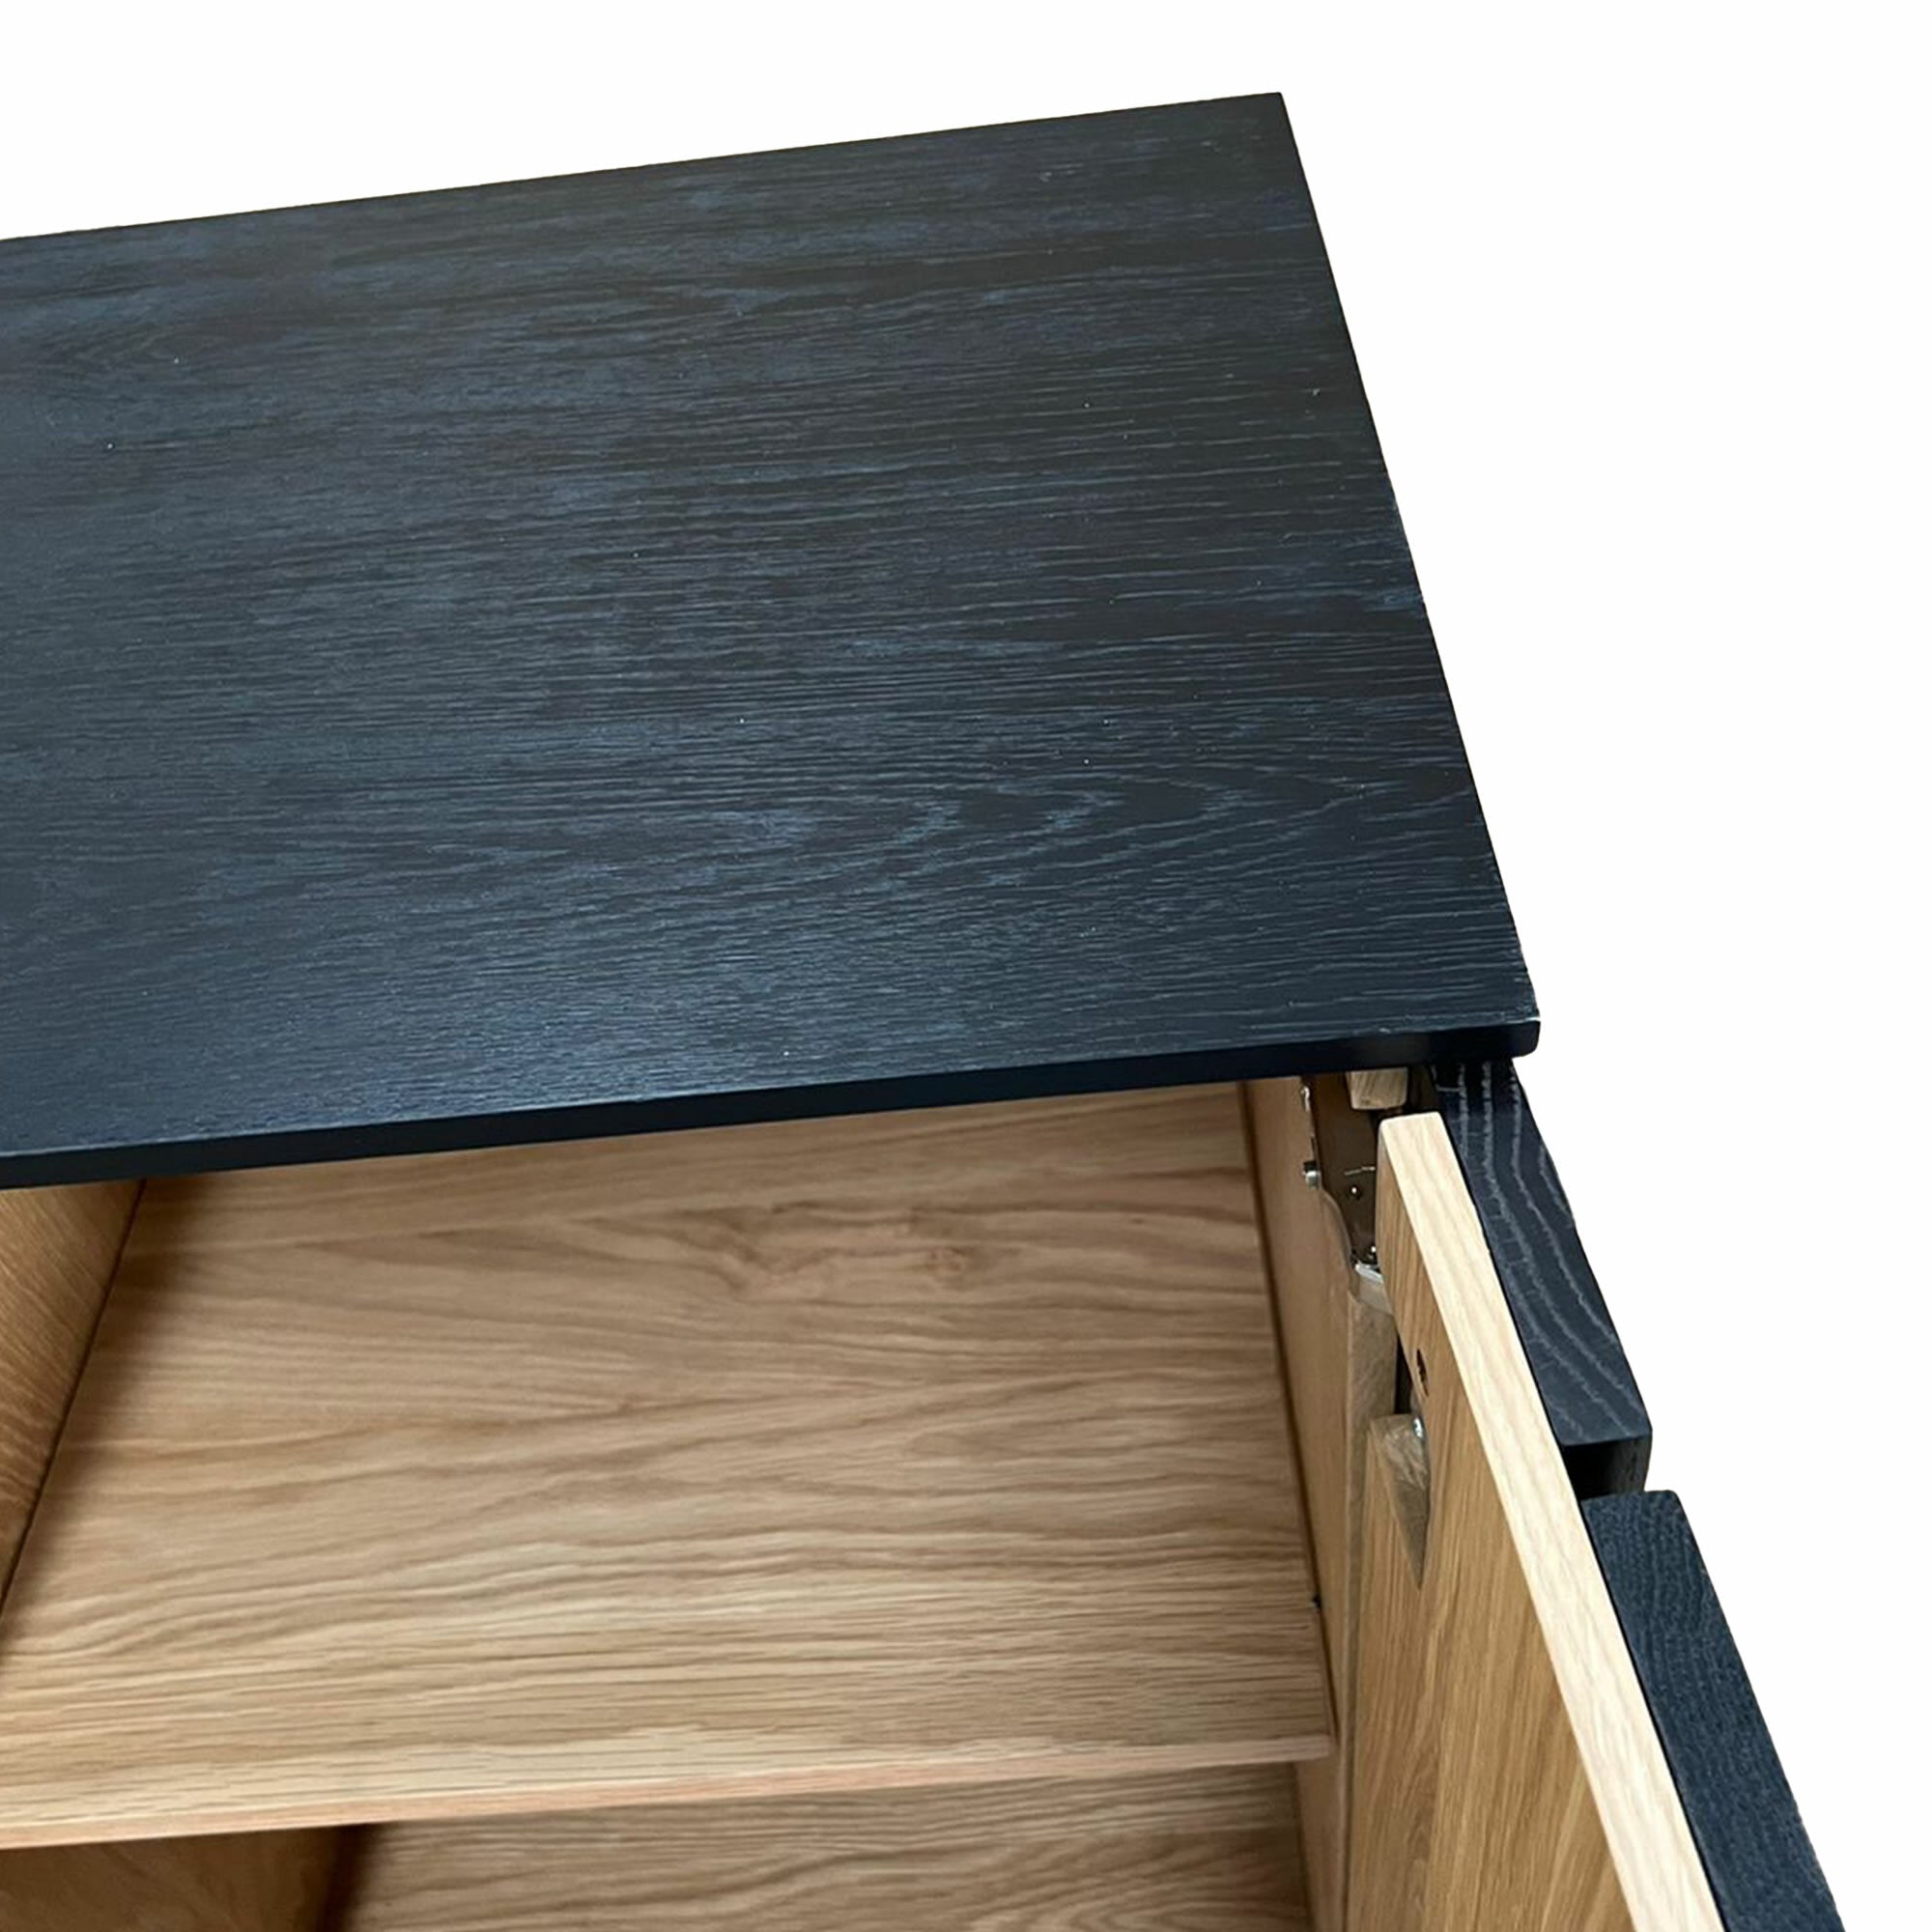 Piha TV Unit - Black Stained Oak Exterior with Natural Oak Interior